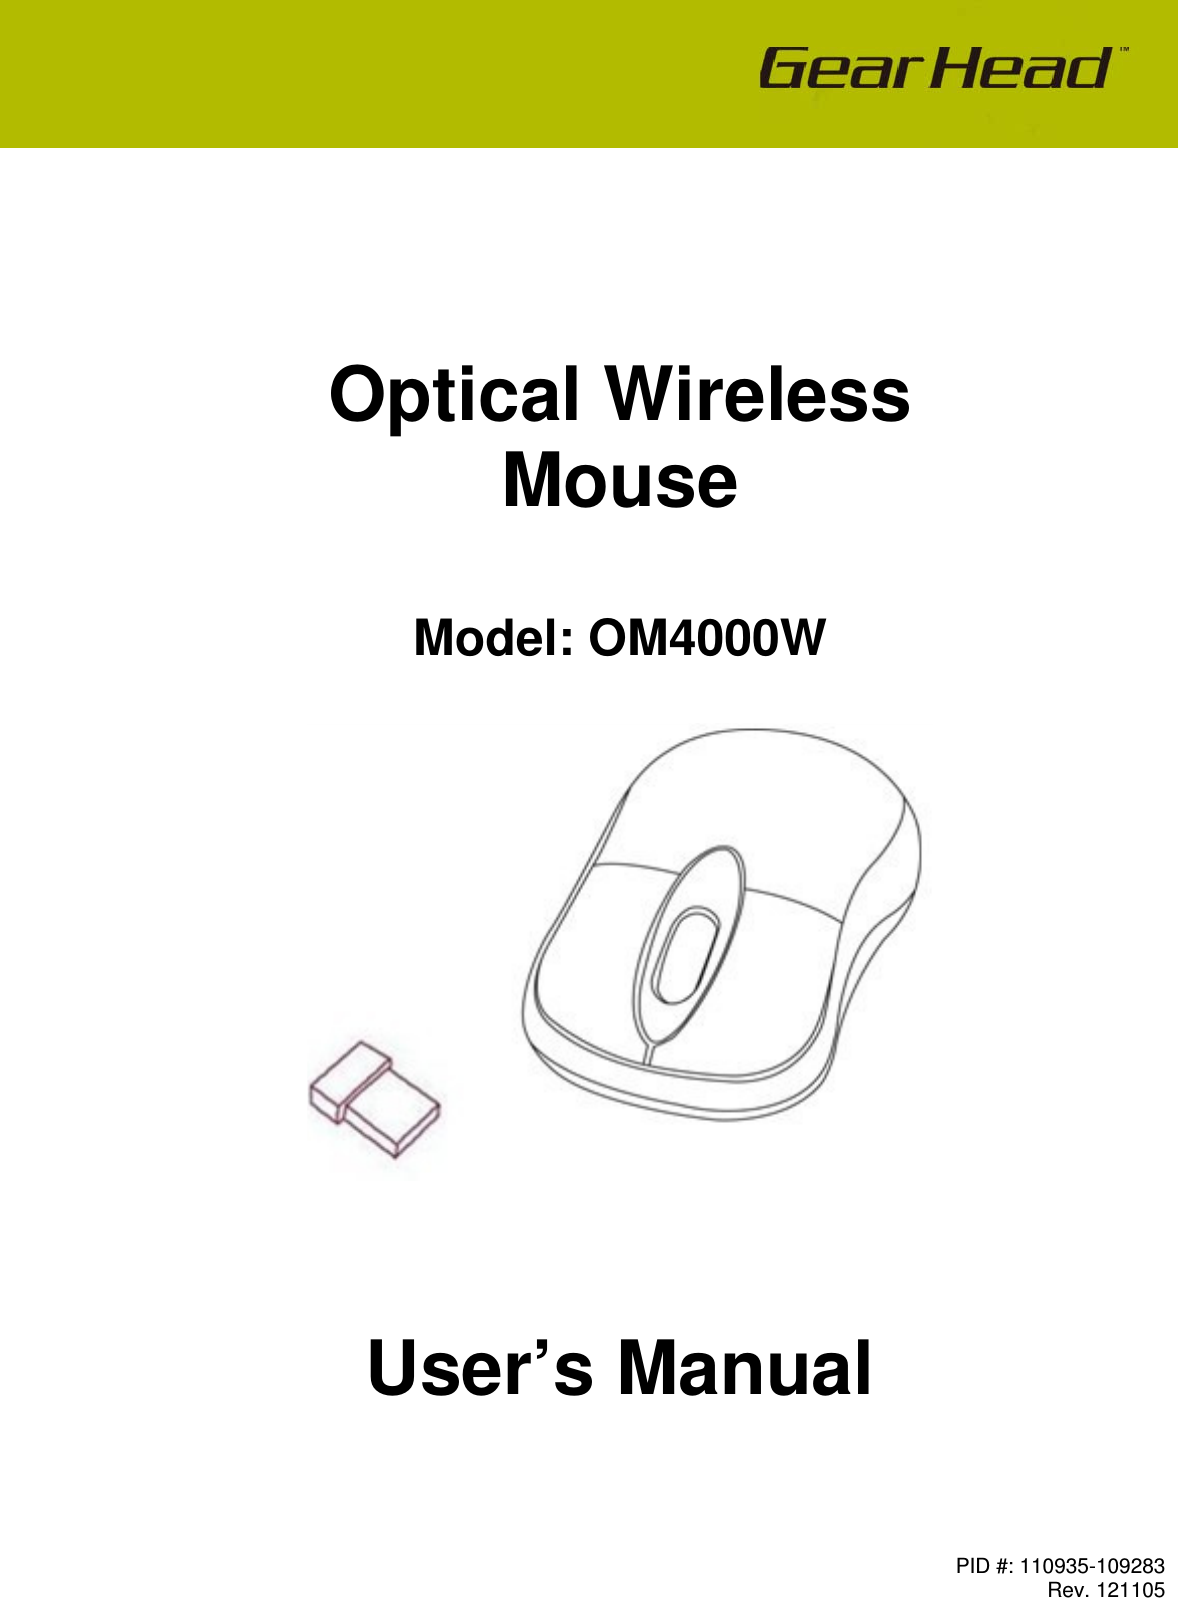 PID #: 110935-109283  Rev. 121105         Optical Wireless Mouse    Model: OM4000W         User’s Manual   